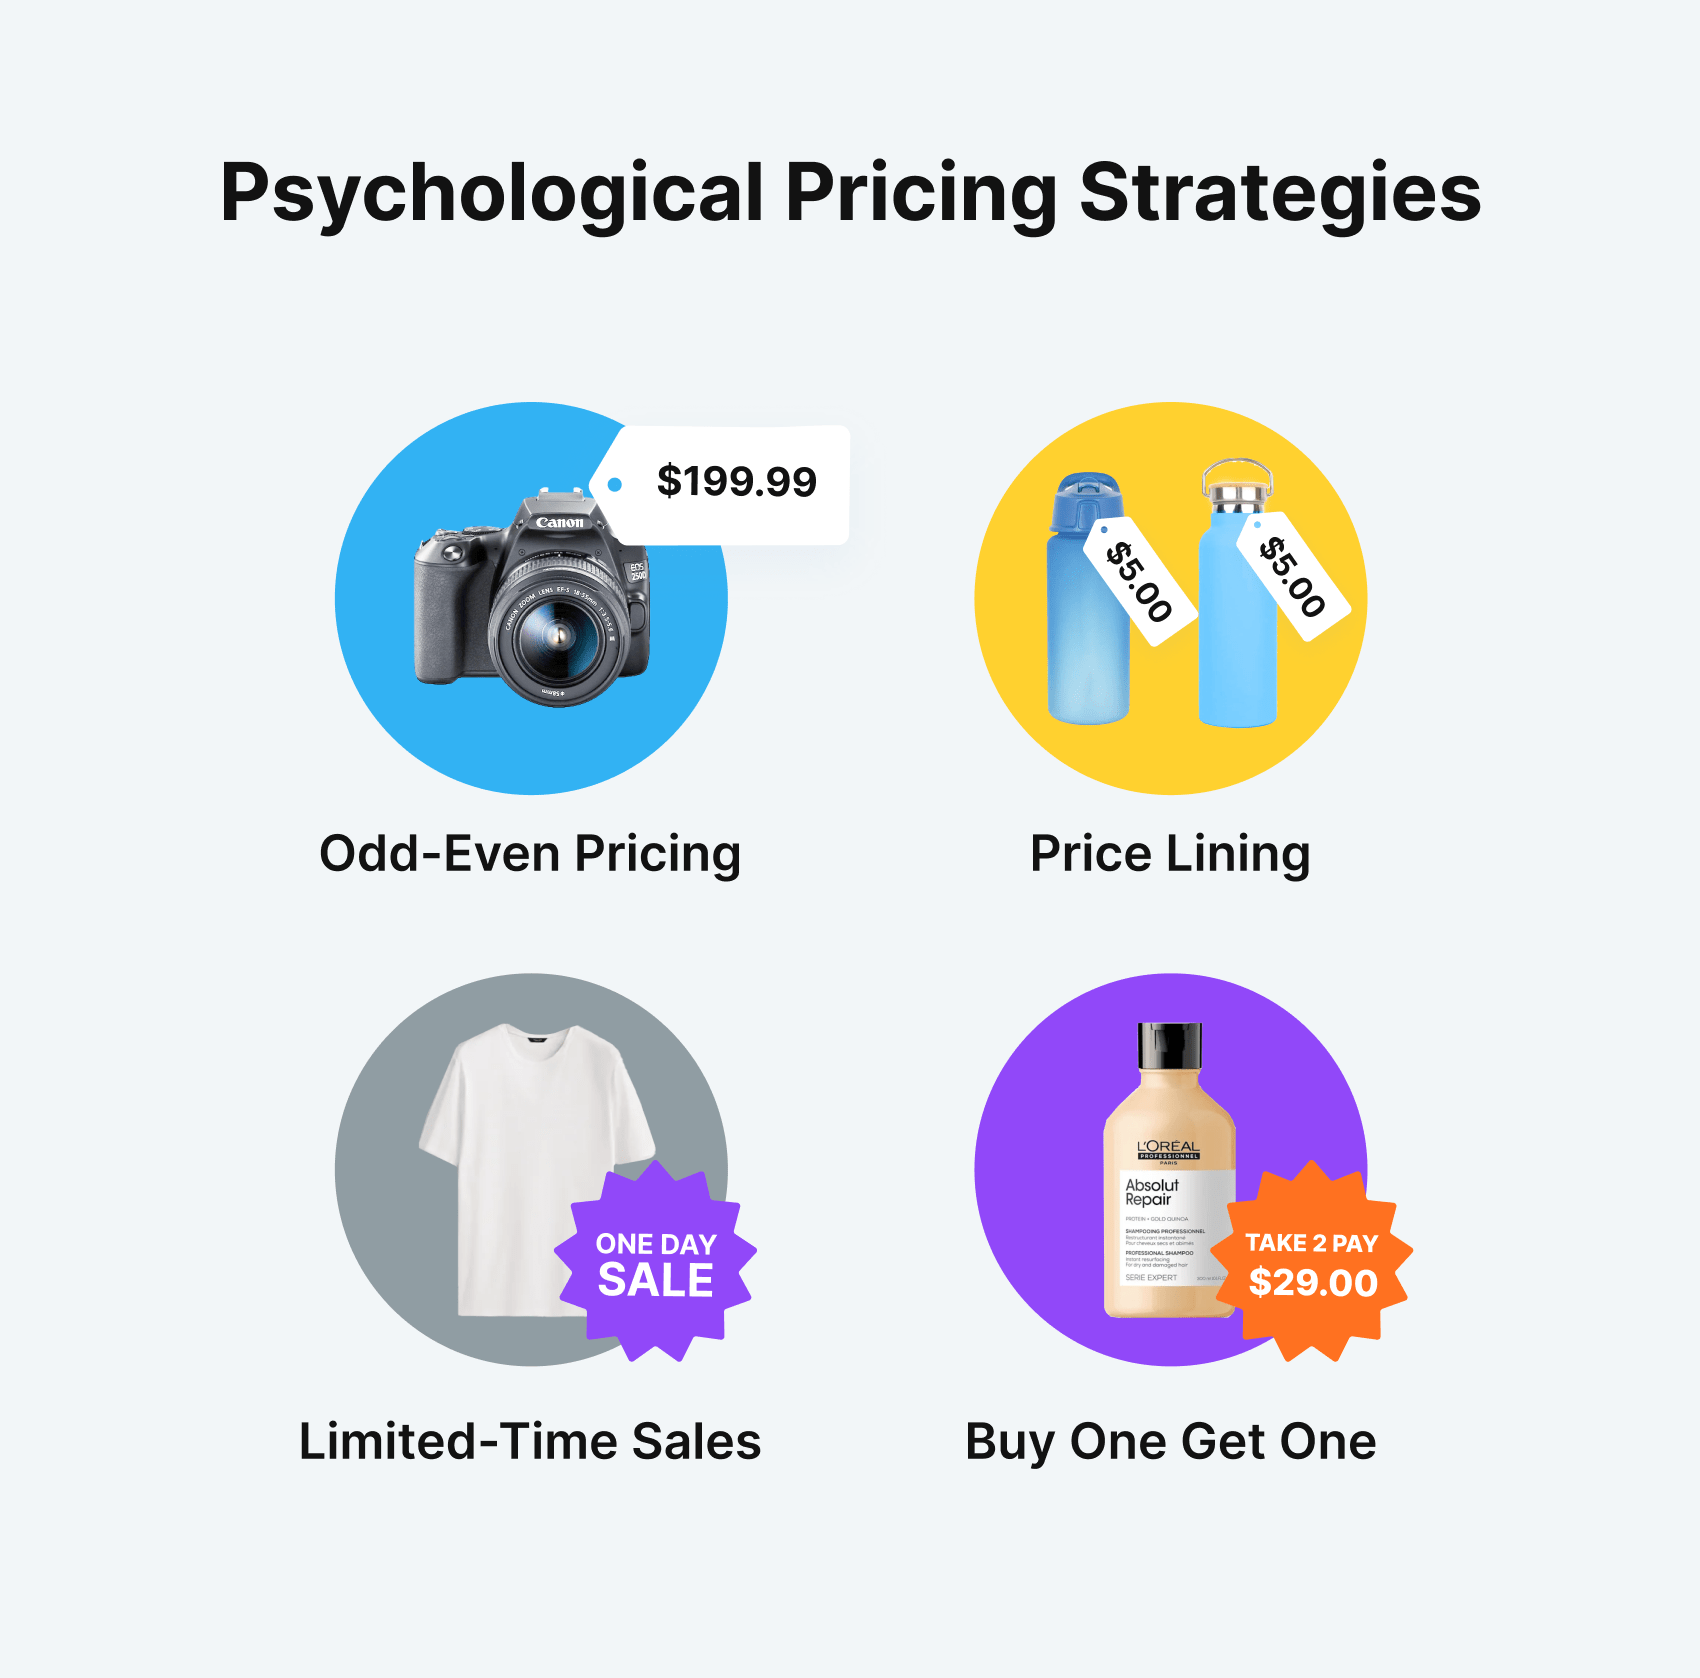 Psychological Pricing Strategies examples